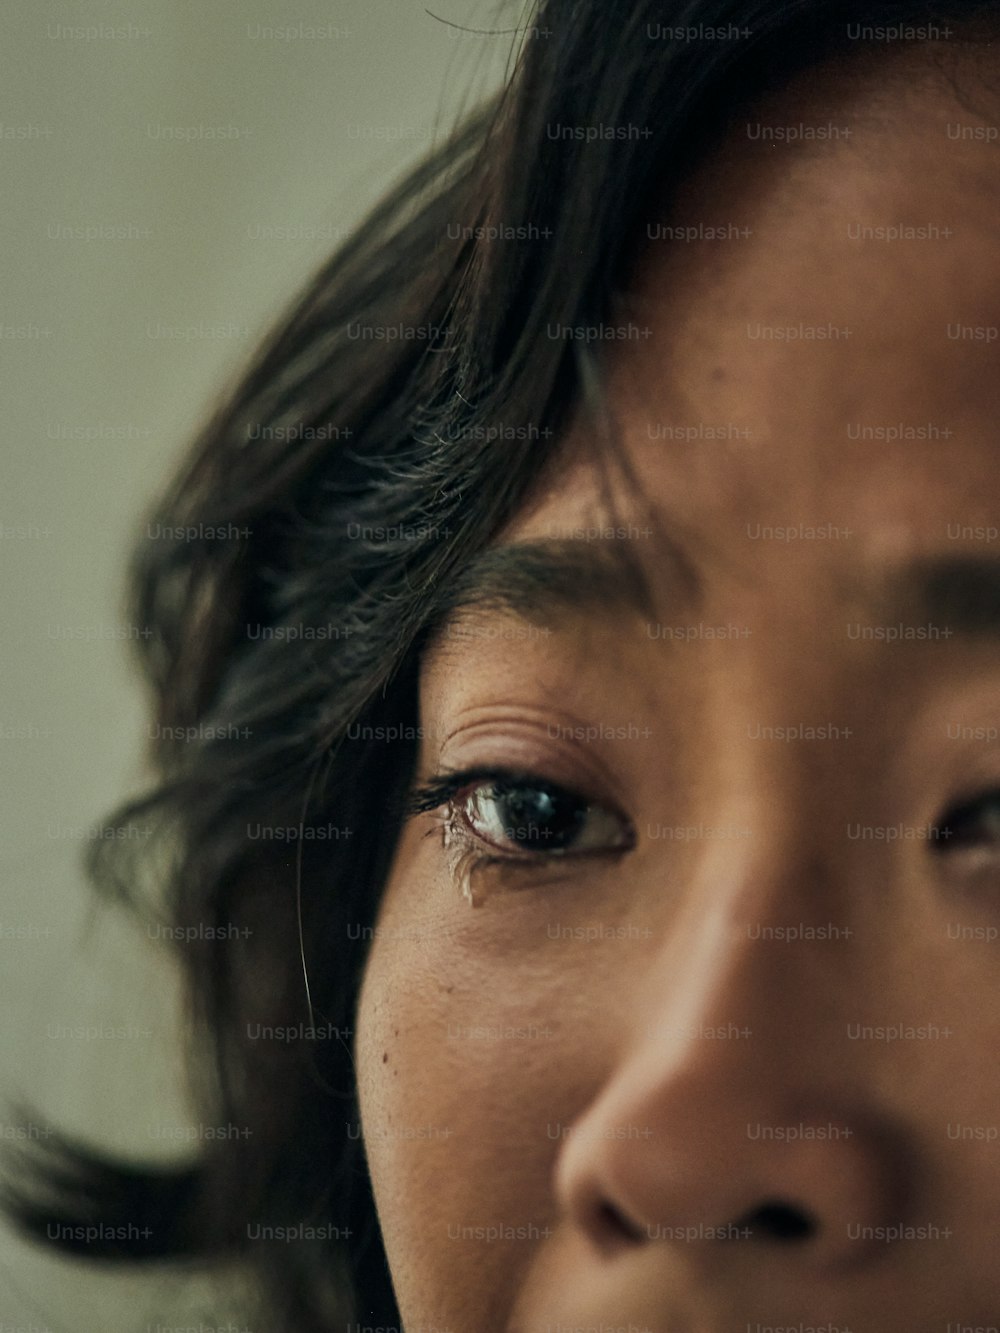 a close up of a woman's face with a concerned look on her face